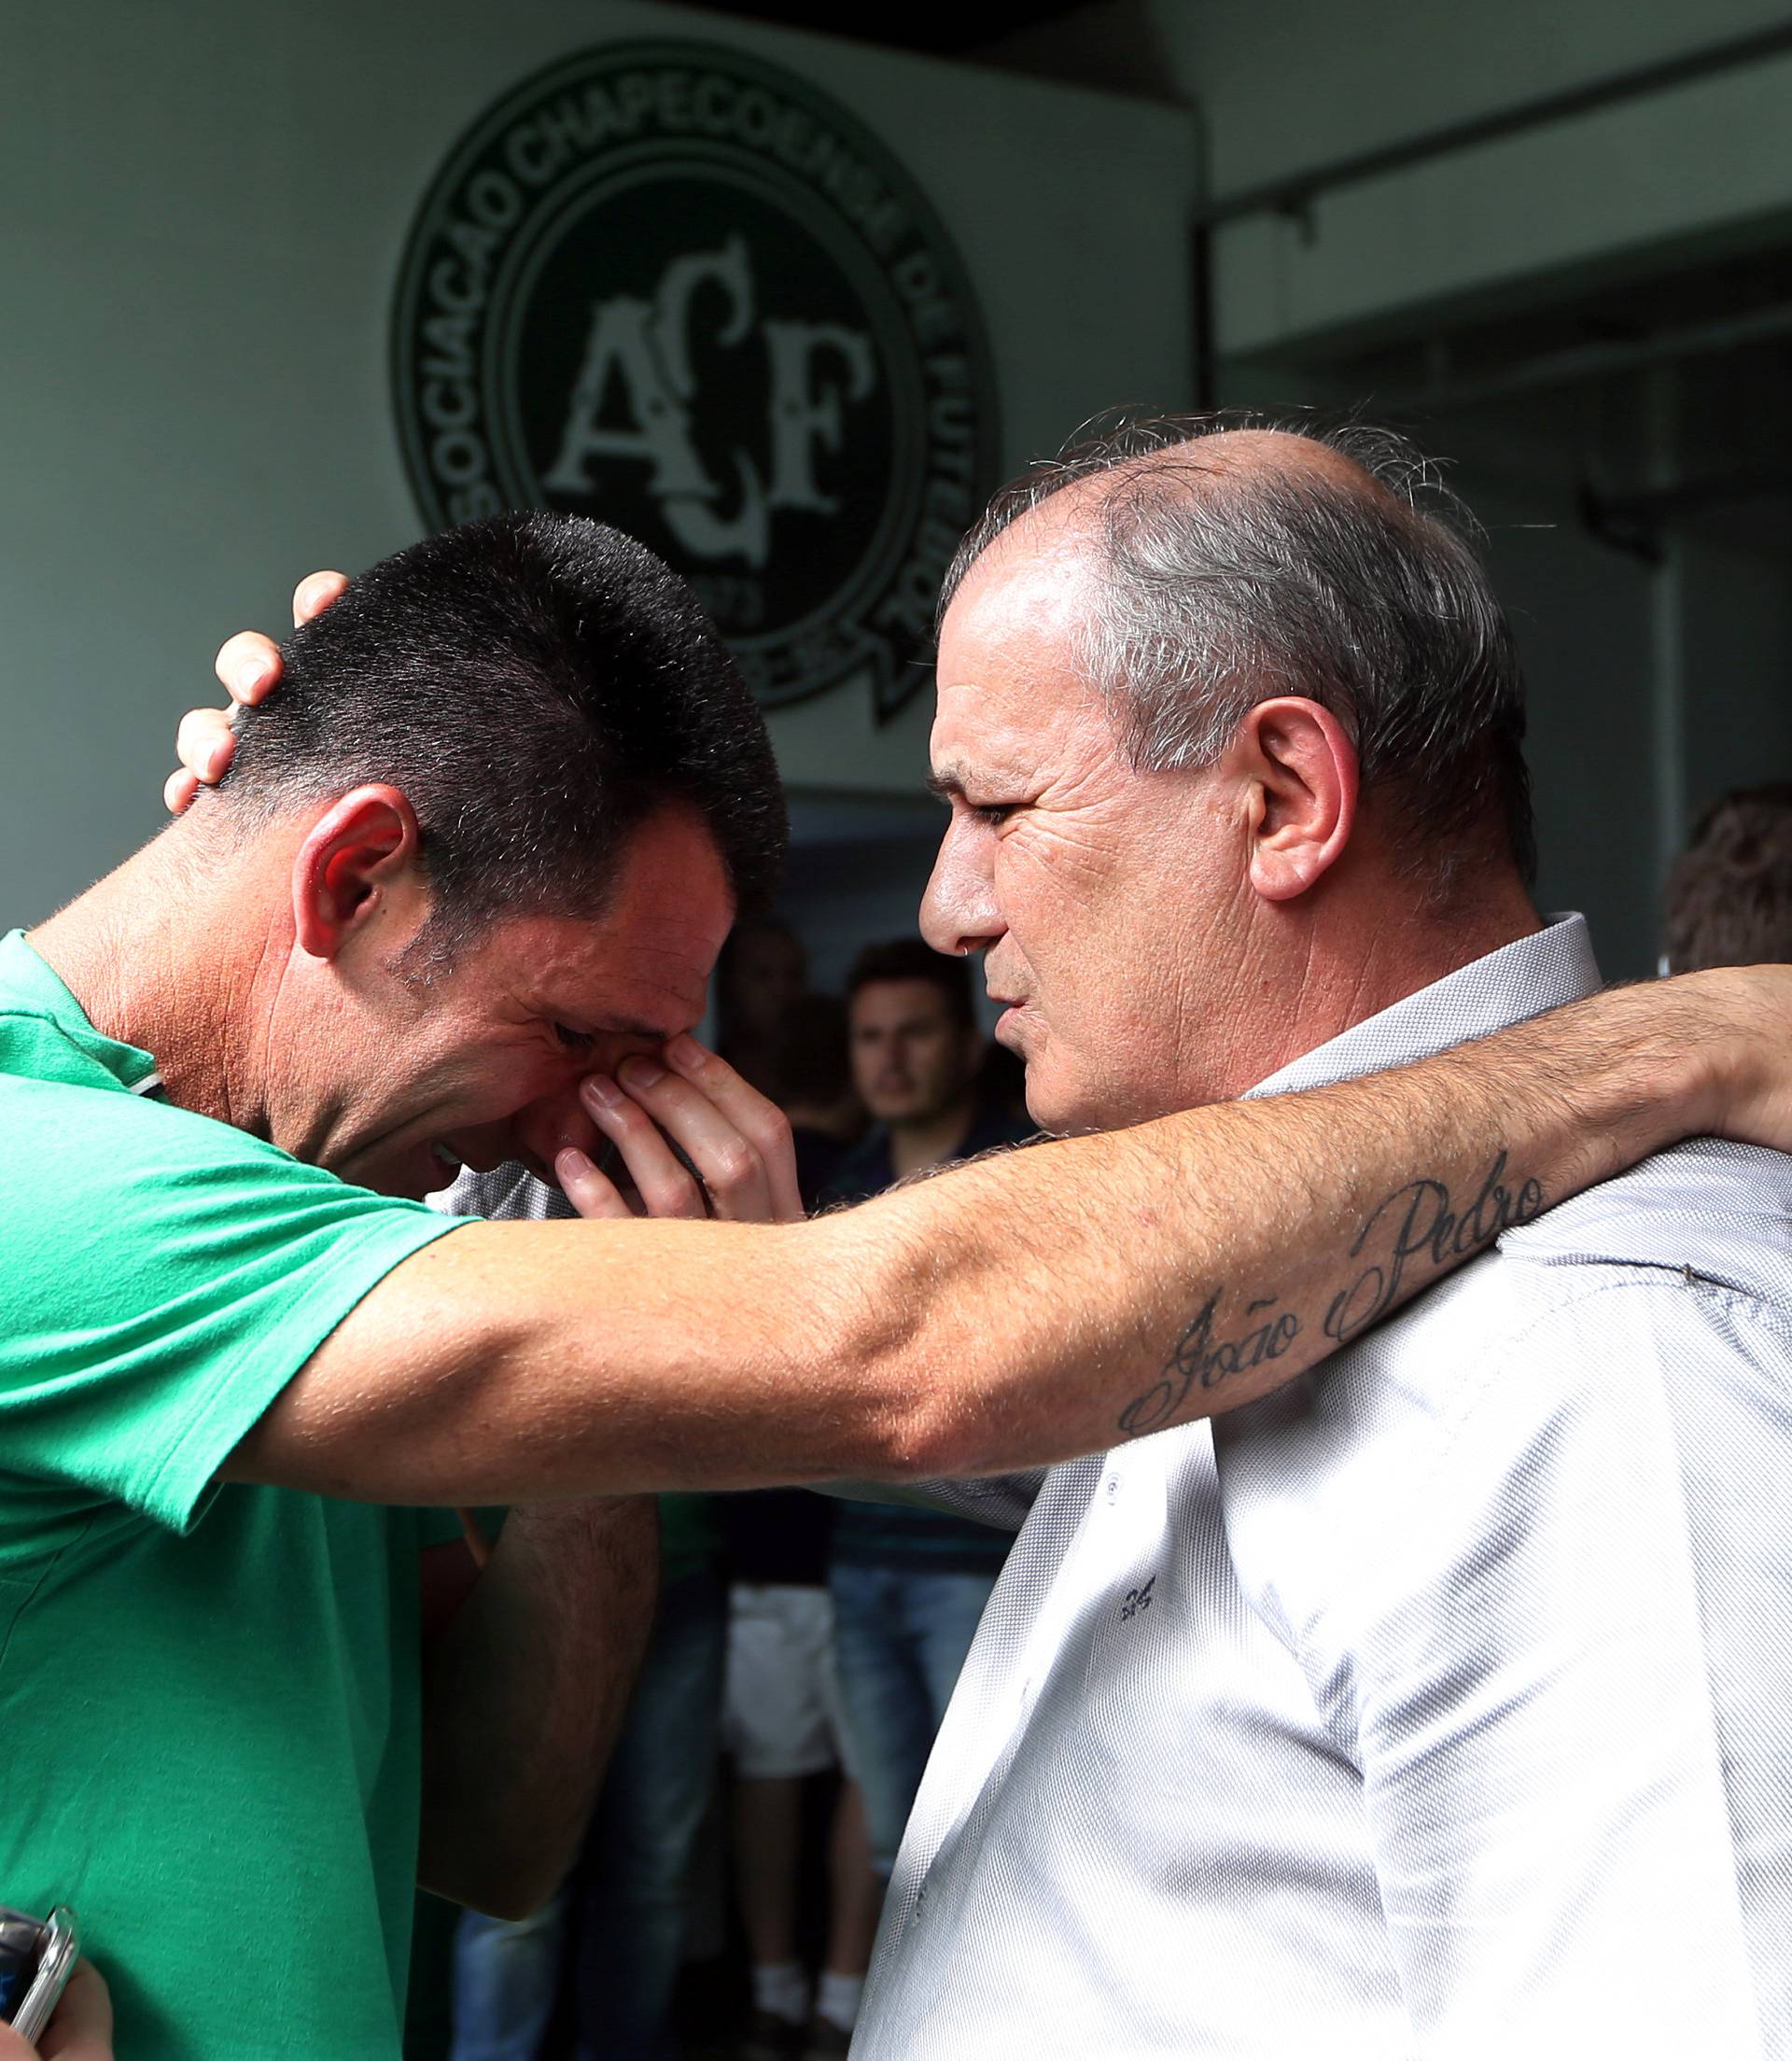 Chapecoense goalkeeper Jose Nivaldo reacts as he talks with Jose Tozzi, who became the team's acting president when his predecessor died in the crash in Chapeco